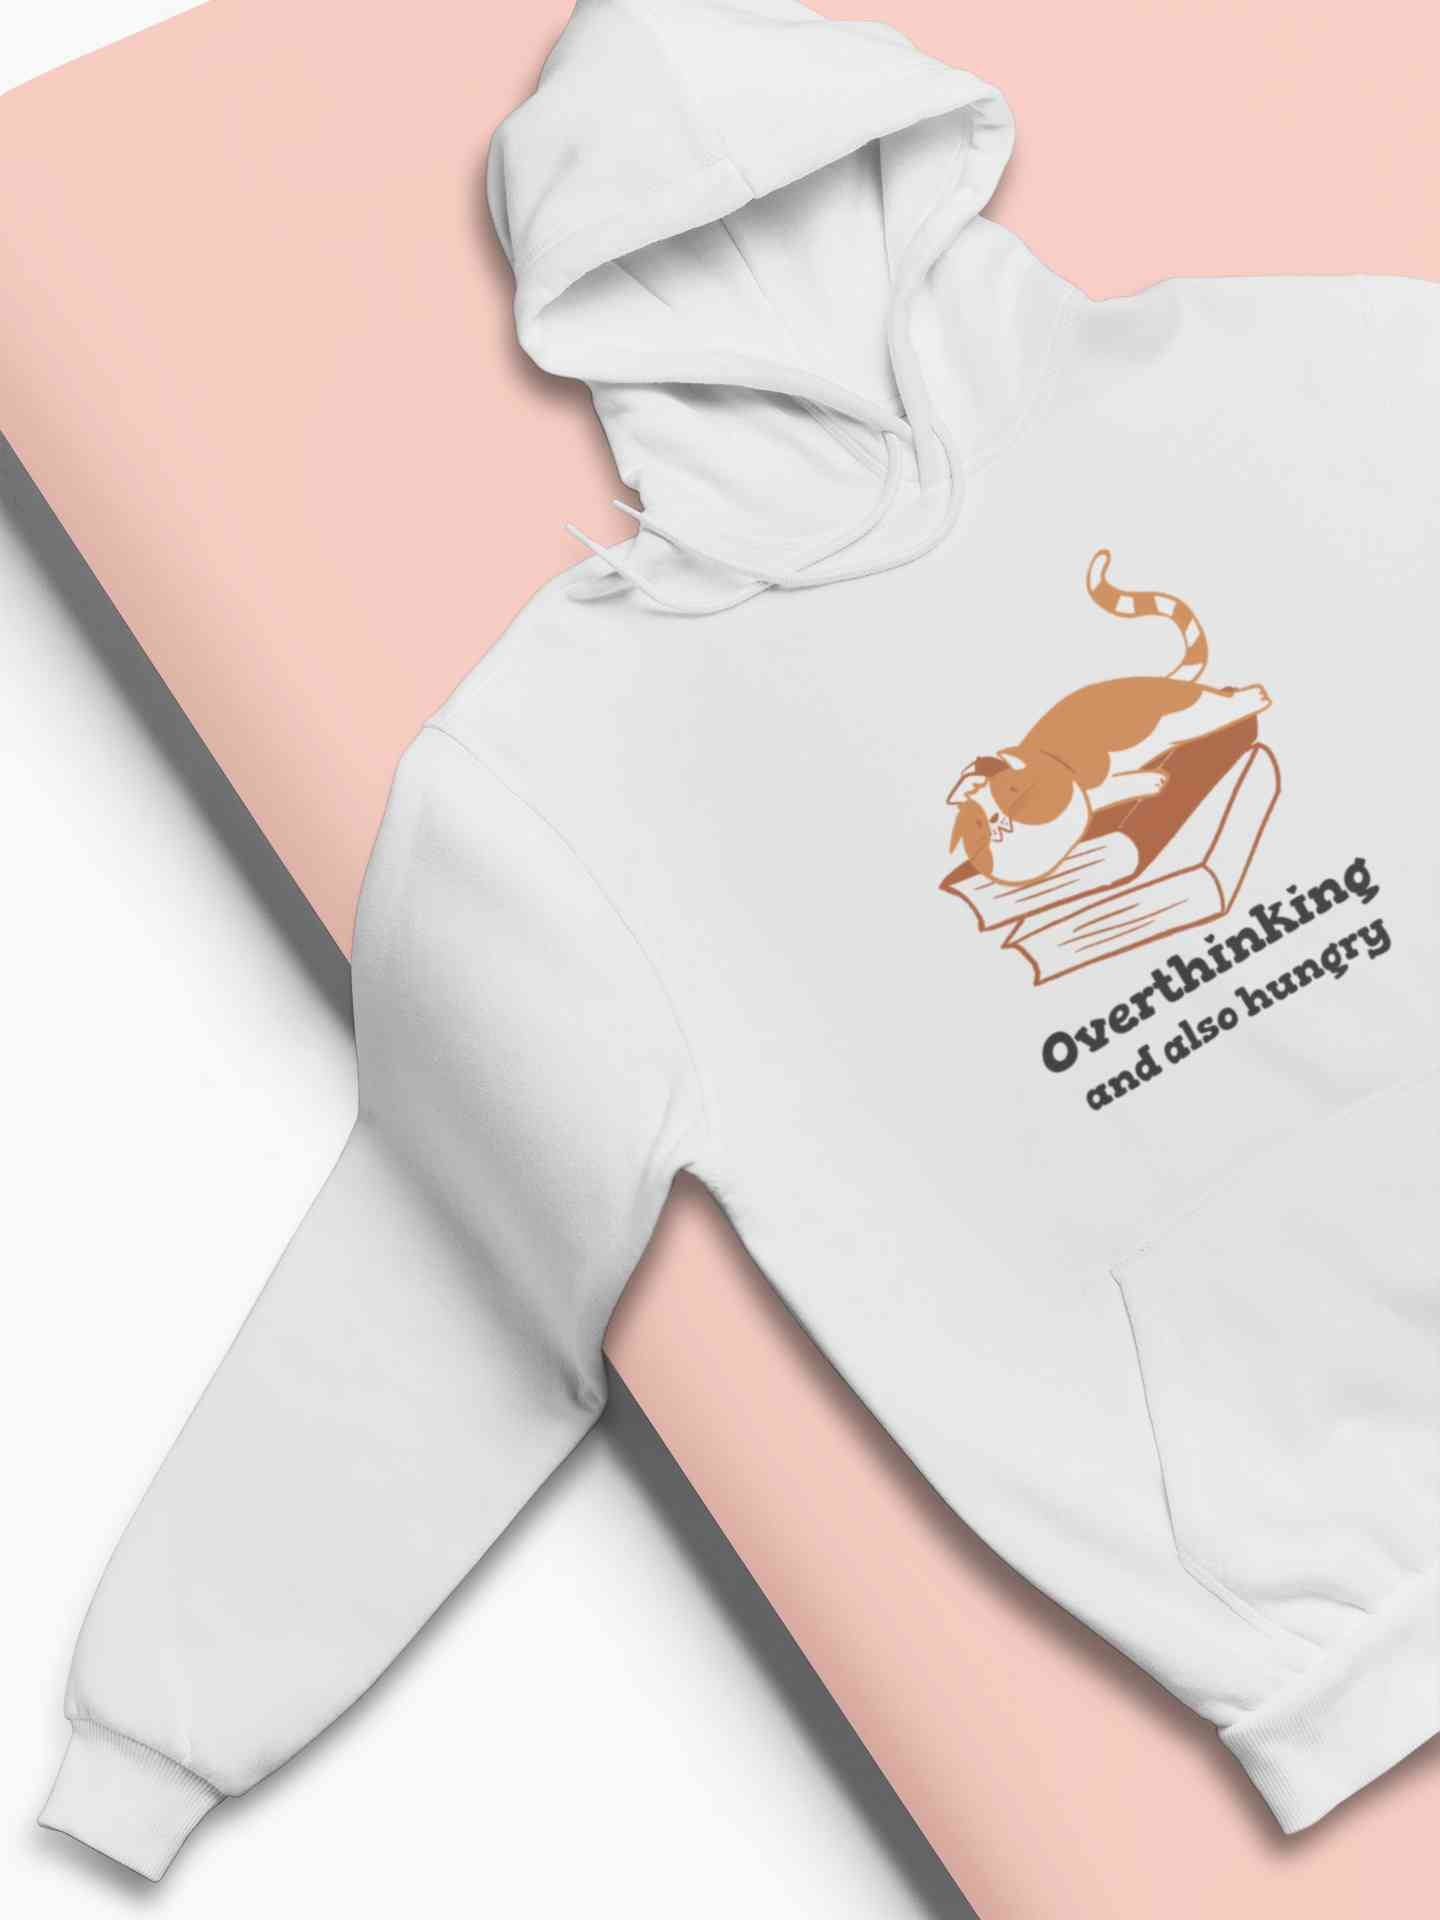 Overthinking And Also Hungry Men Hoodies-FunkyTeesClub